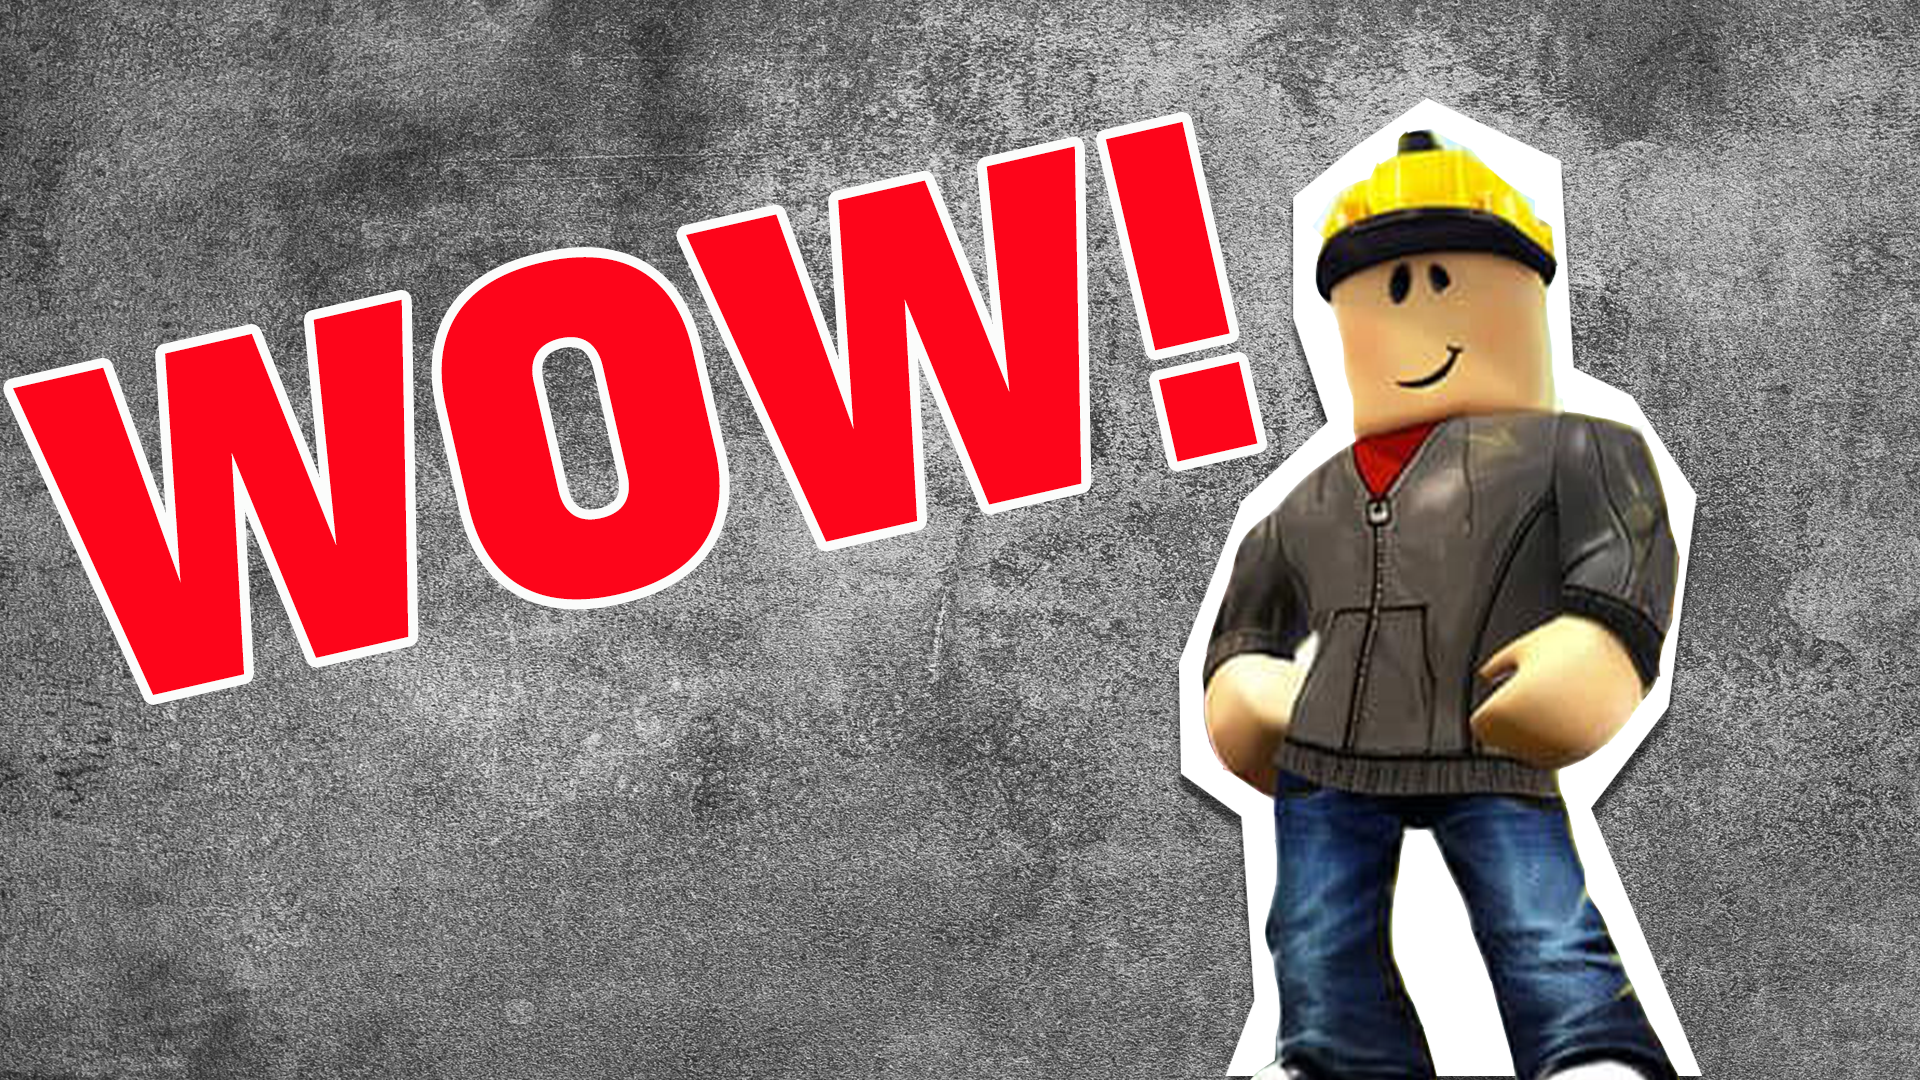 Wahey! You're officially a Roblox expert, because you got 10/10! Incredible stuff, well done!